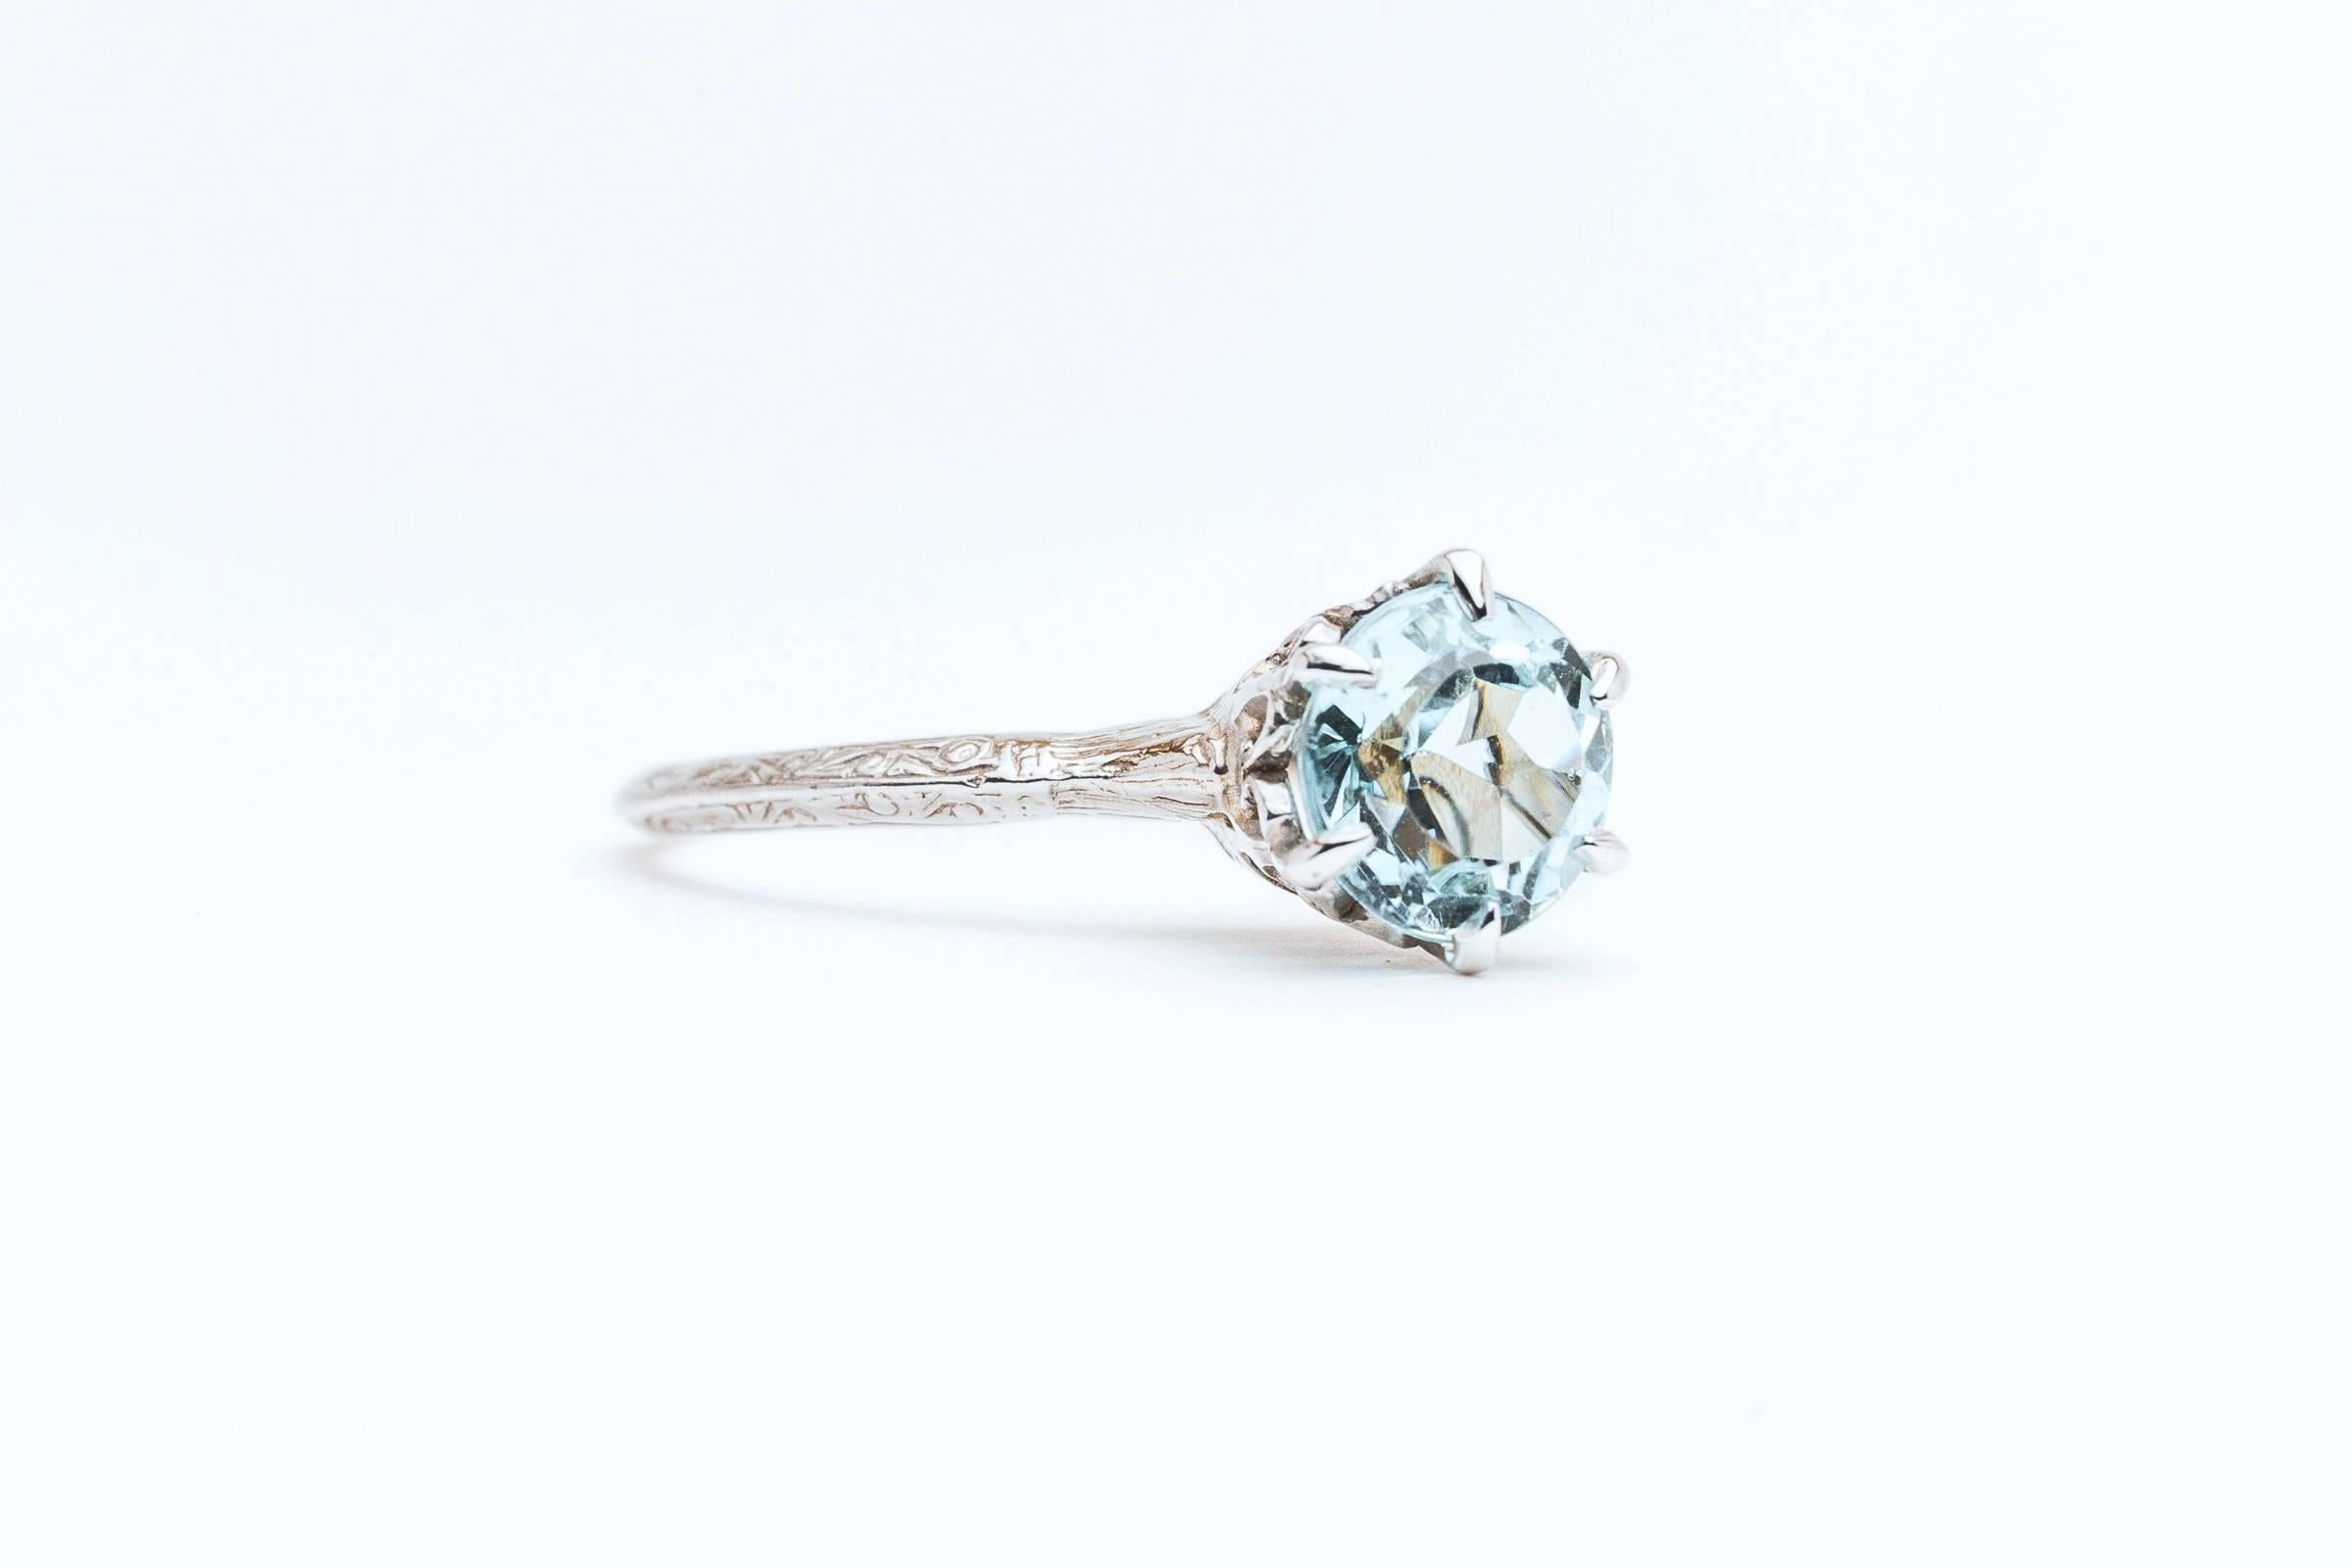 Beacon Hill Jewelers Presents:

A beautiful art deco period aquamarine solitaire ring in 14 karat white gold. Centered by an ocean blue 1.20 carat antique European cut aquamarine this ring features a beautiful hand crafted wire filigree work head,